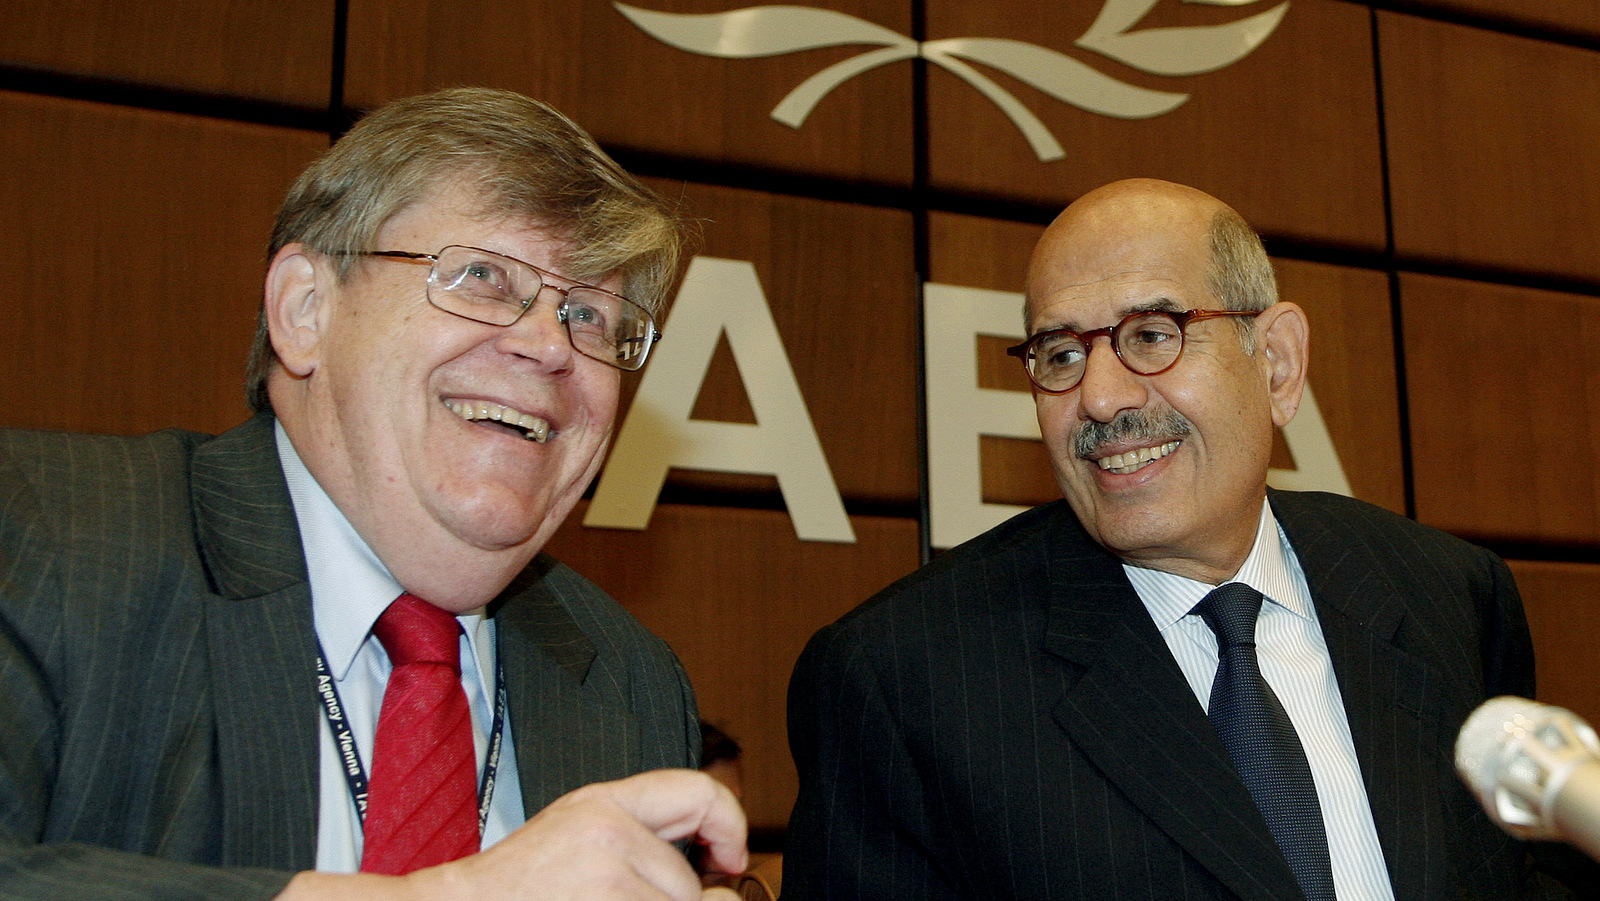 Chief U.N. Weapons Inspector Olli Heinonen and Director General of the IAEA Mohamed ElBaradei, from left, talk during the International Atomic Energy Agency's, IAEA, 35-nation board of governors meeting at Vienna's International Cente, Sept. 12, 2007. (AP/Hans Punz)